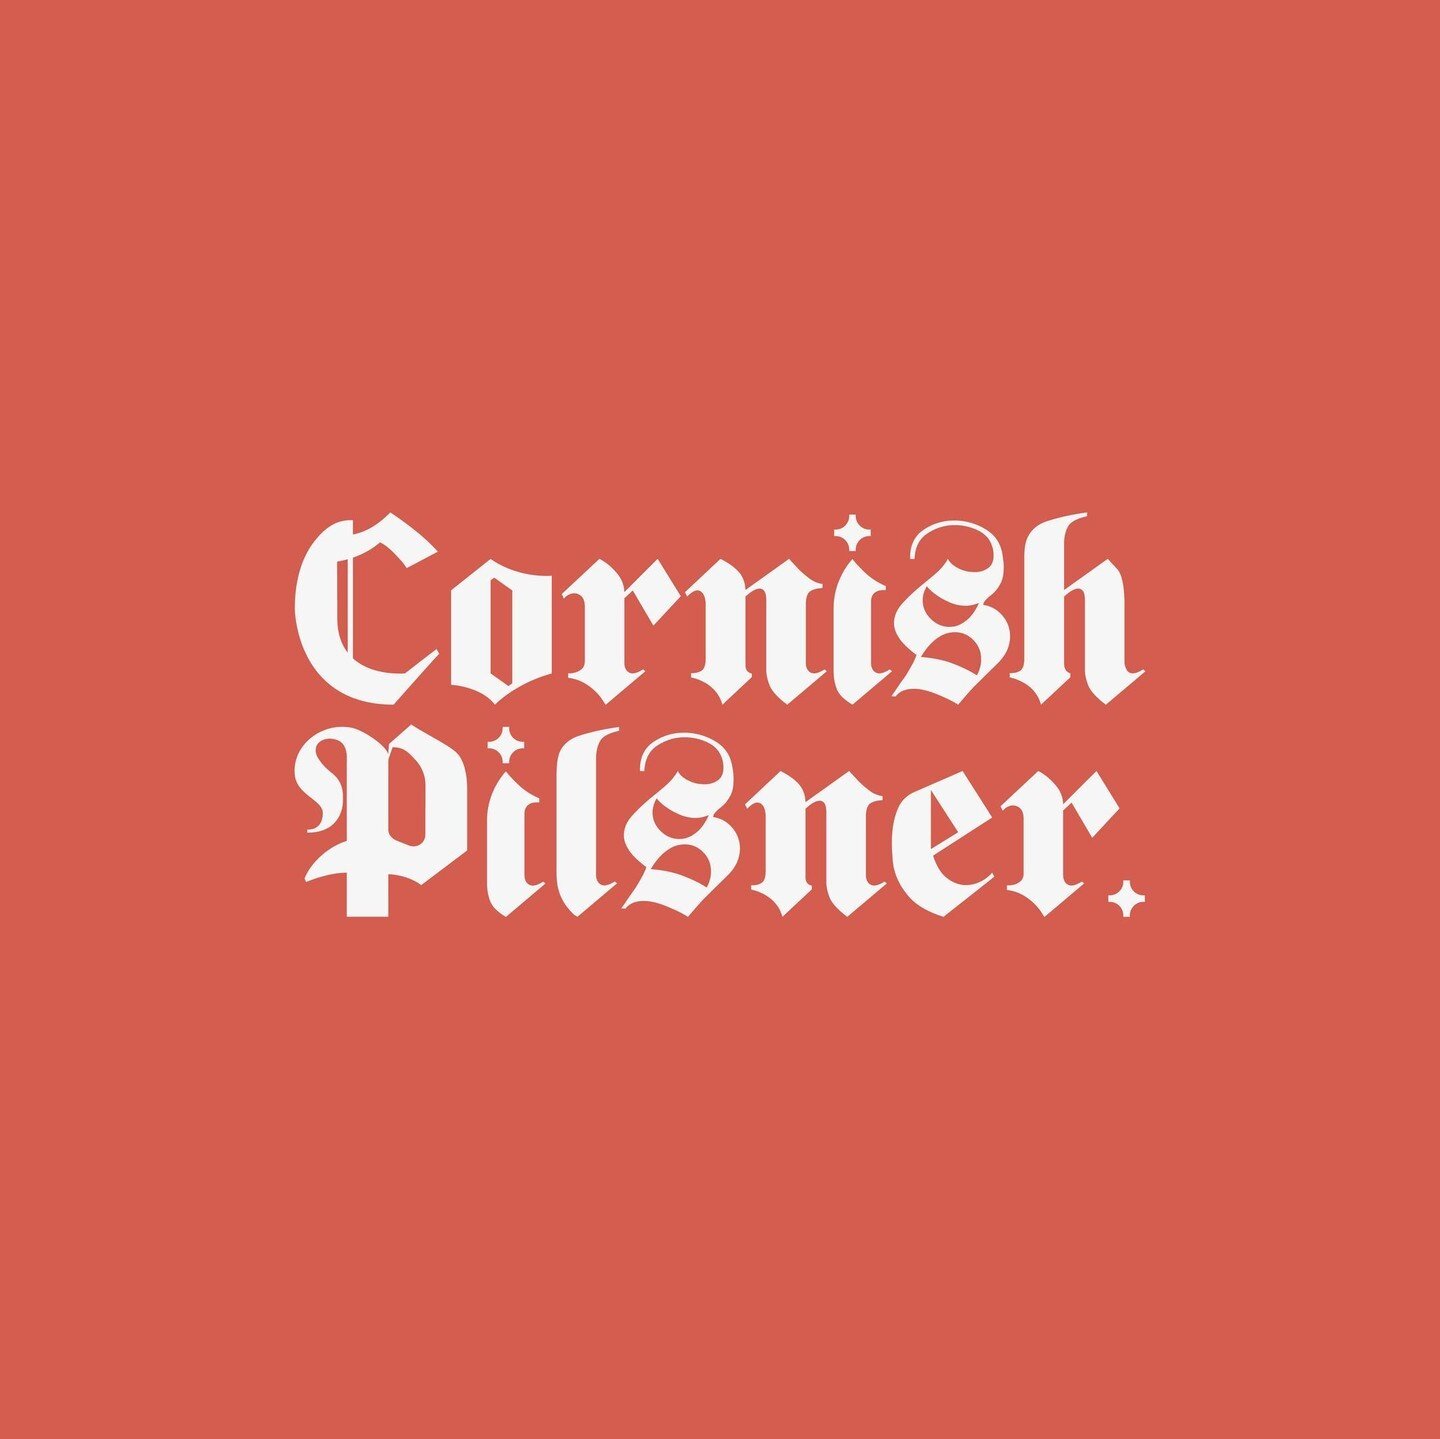 A refresh for @cornishcrownbrewing, some more custom typography for the Cornish Pilsner. ⁠
_⁠
_⁠
_⁠
#blackletter #printdesign #printisnotdead #artdiscover #graphicdesignblg #graphicdesign #itsnicethat #createcultivate #inspofinds #eyeondesign #dailya